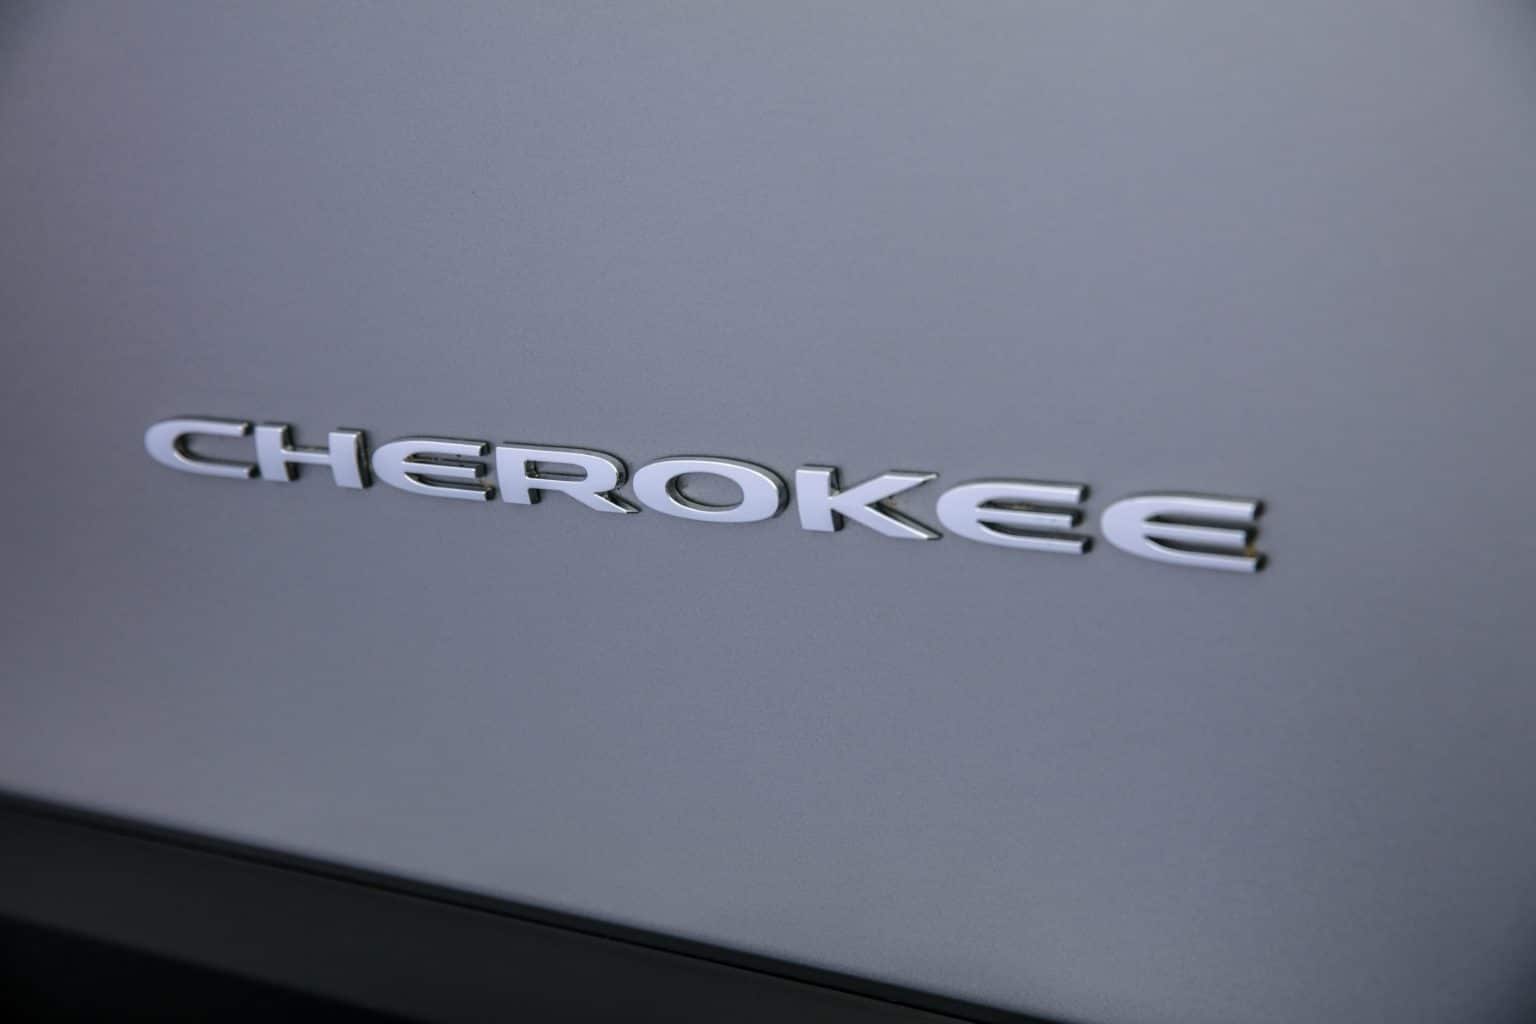 The Jeep Cherokee logo on the trim.